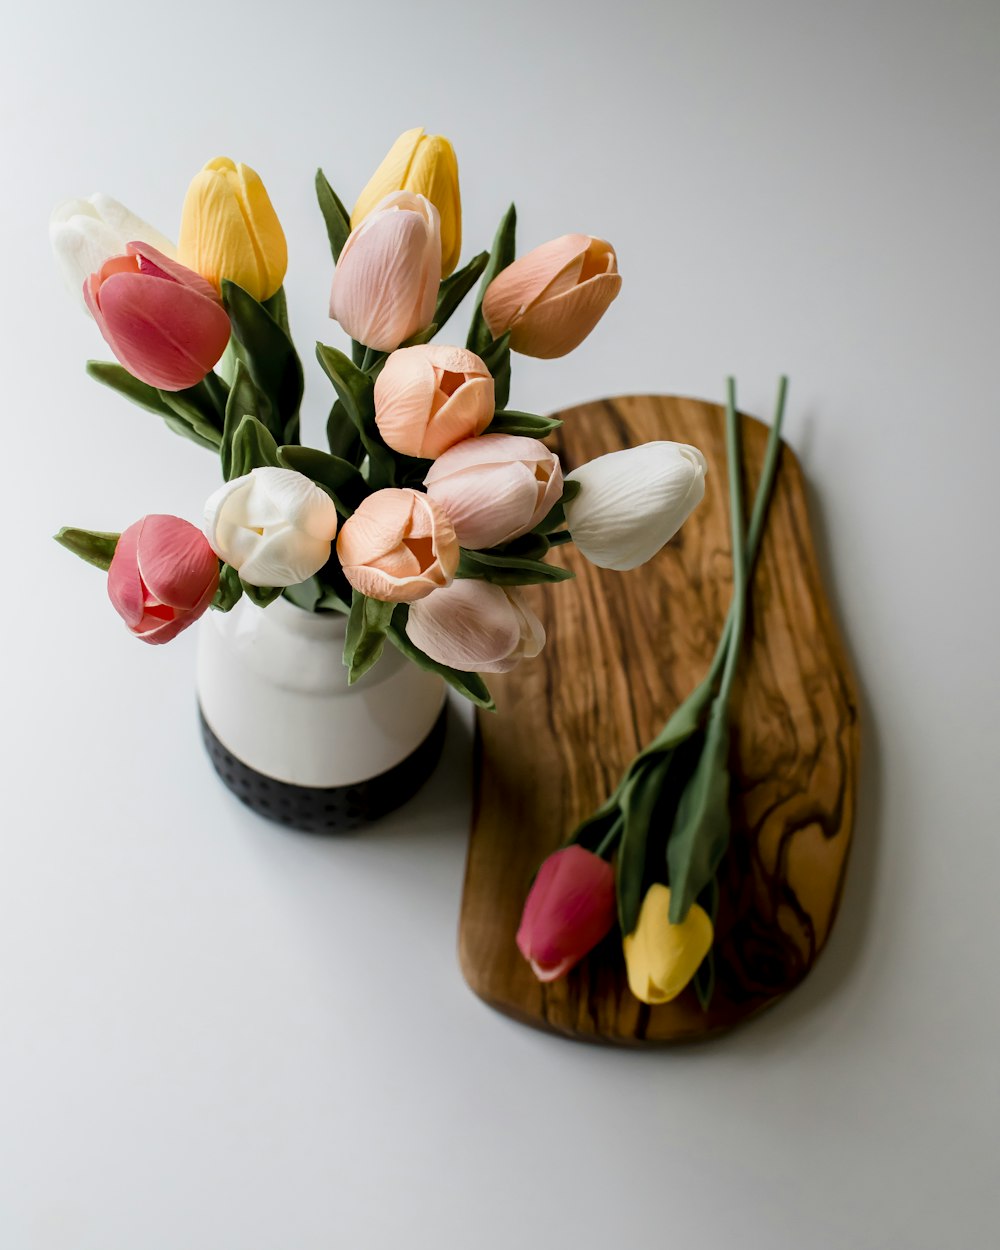 pink and white tulips in white and brown ceramic vase